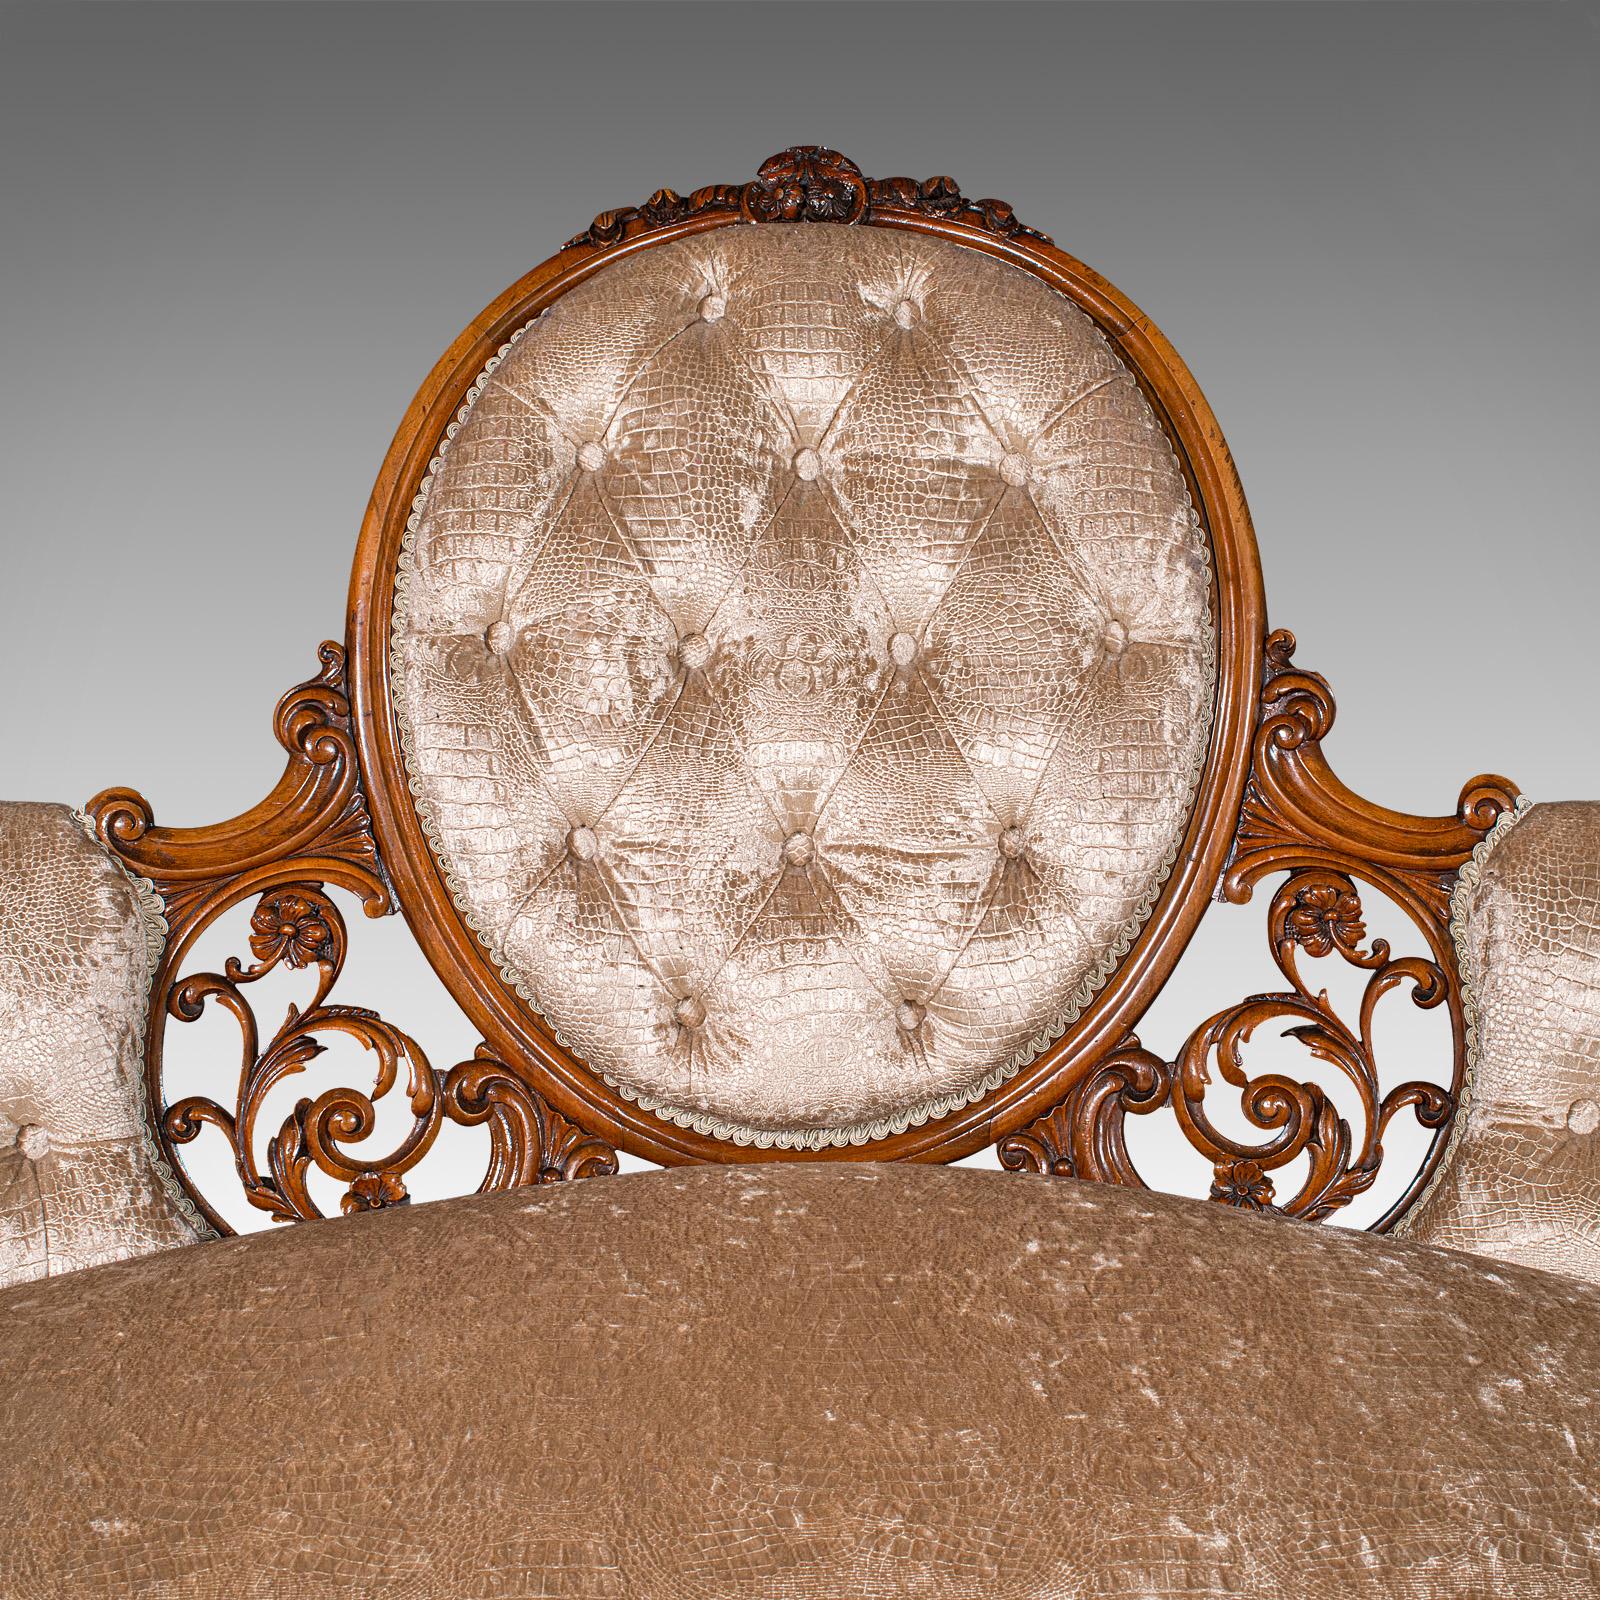 Upholstery Antique Carved Spoon Back Settee, English, Walnut, Showpiece Sofa, Victorian For Sale